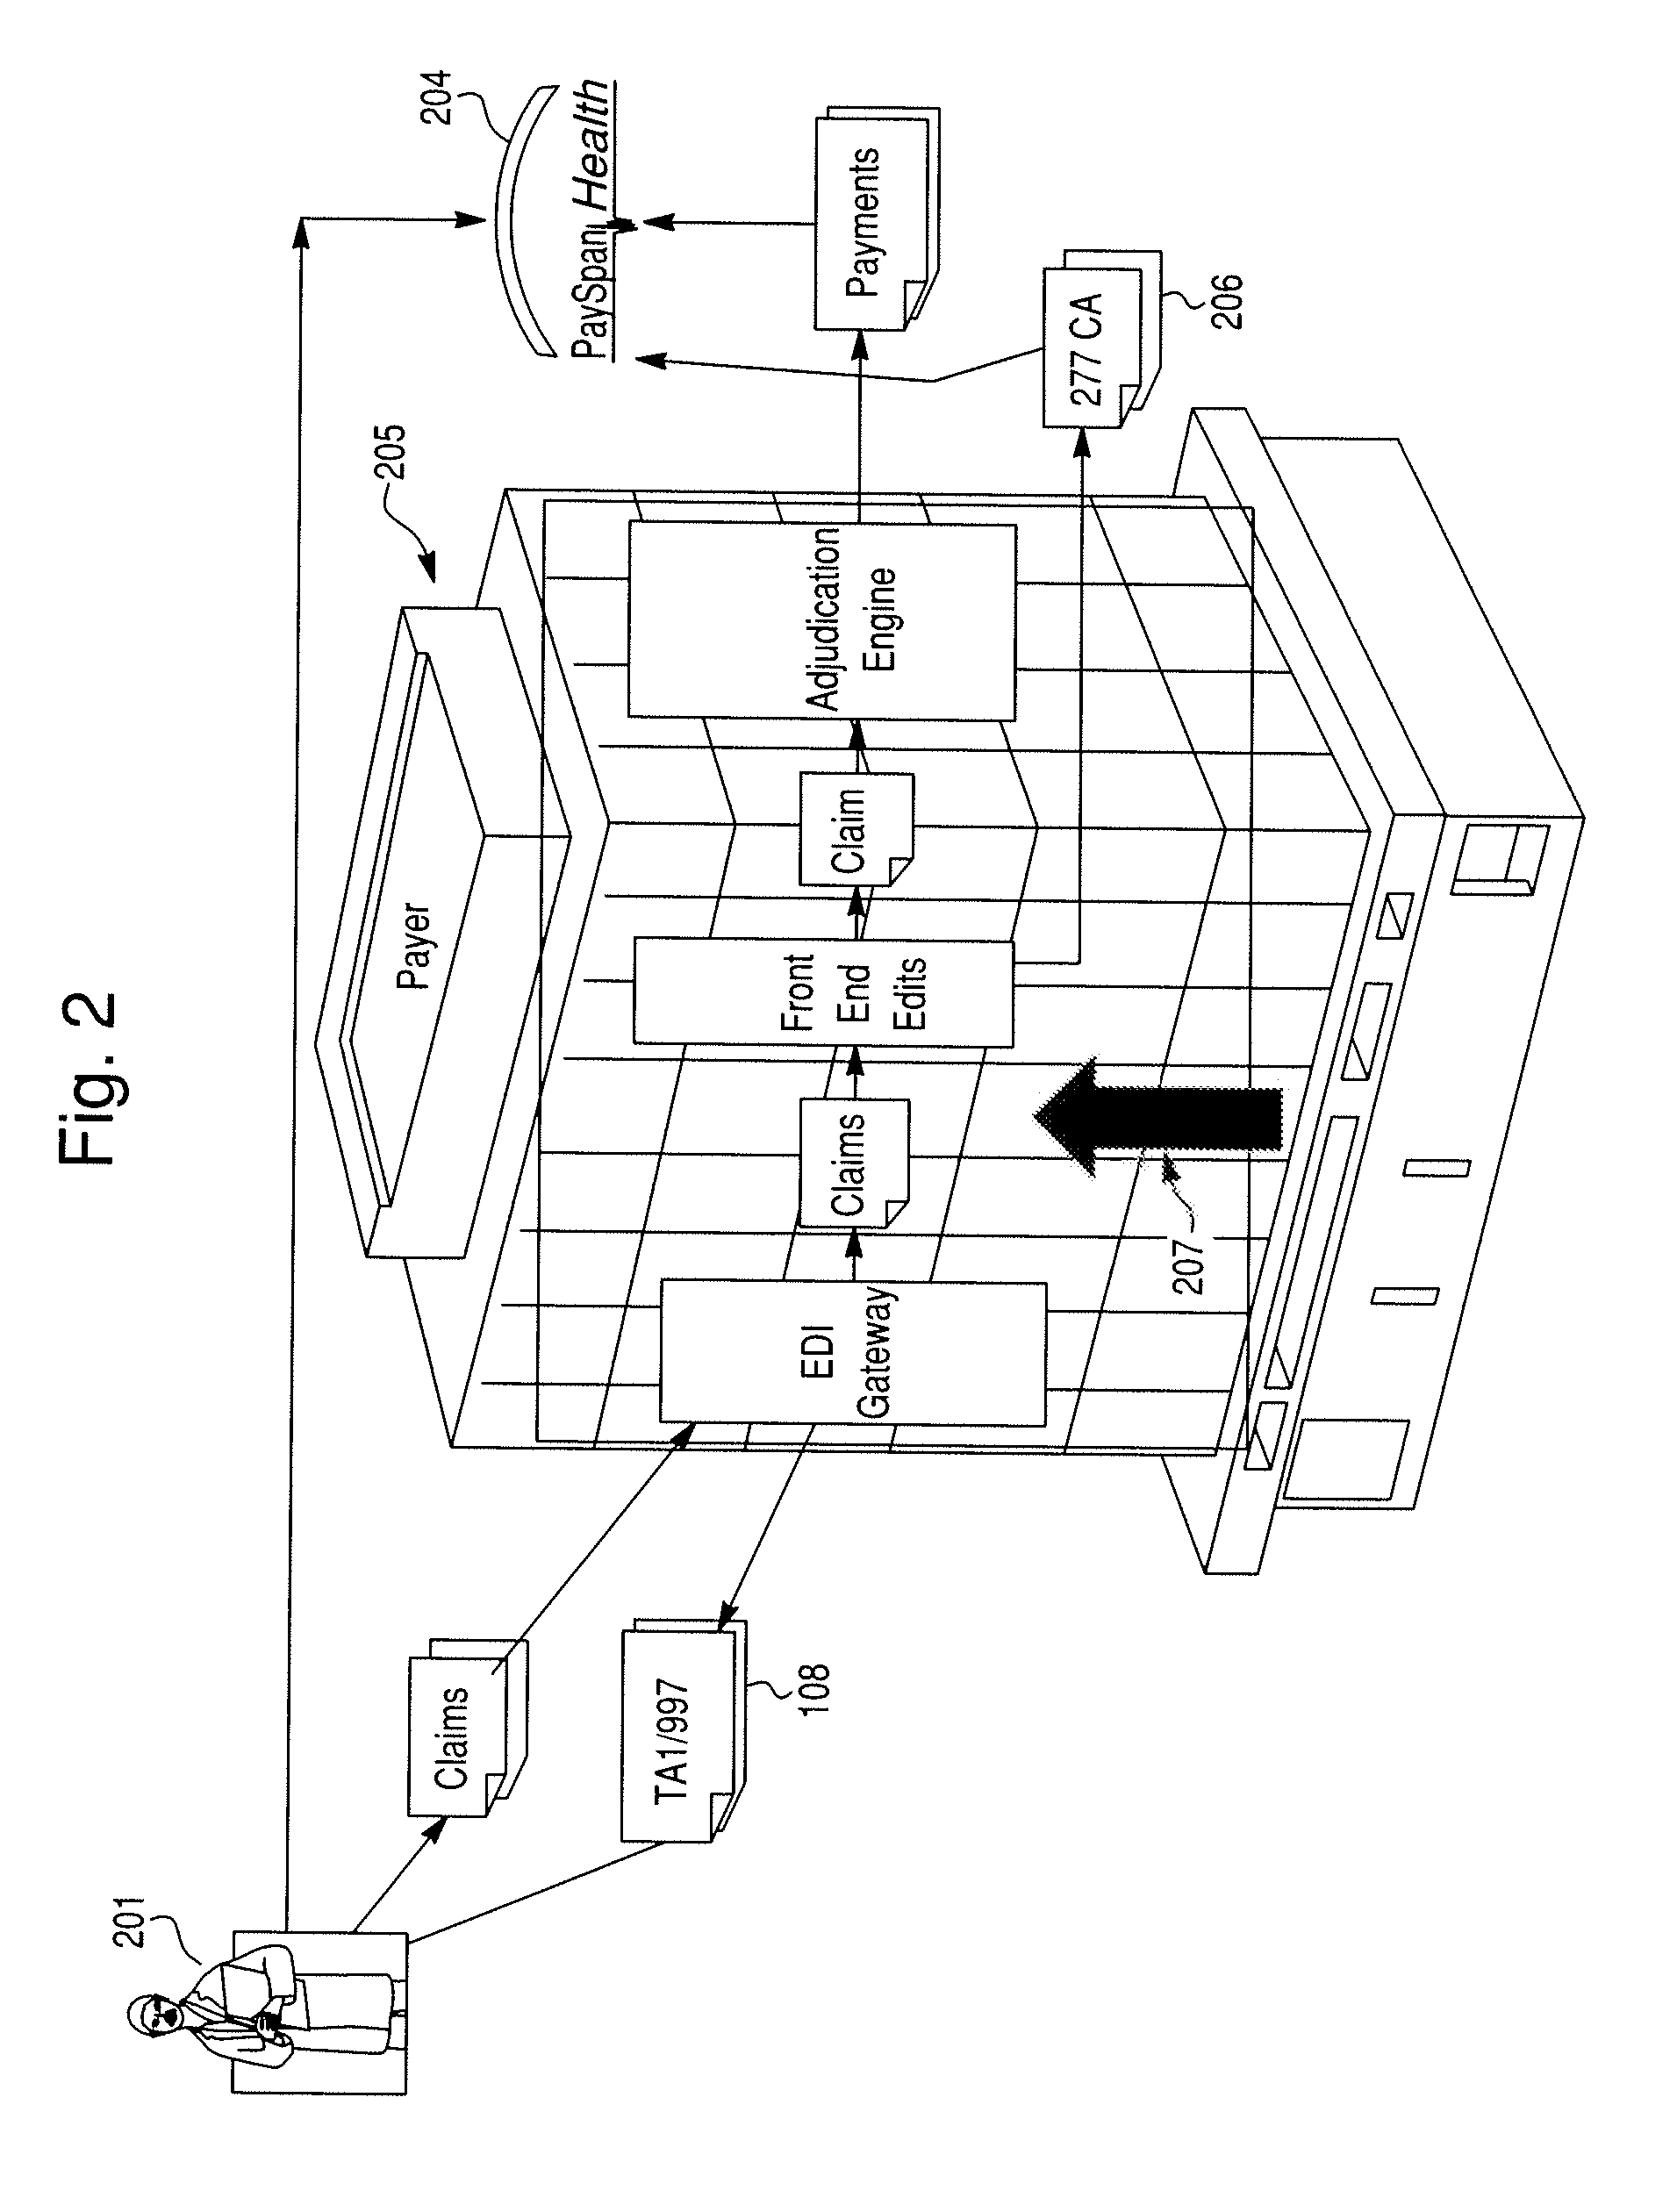 Systems and methods for facilitating healthcare cost remittance, adjudication, and reimbursement processes